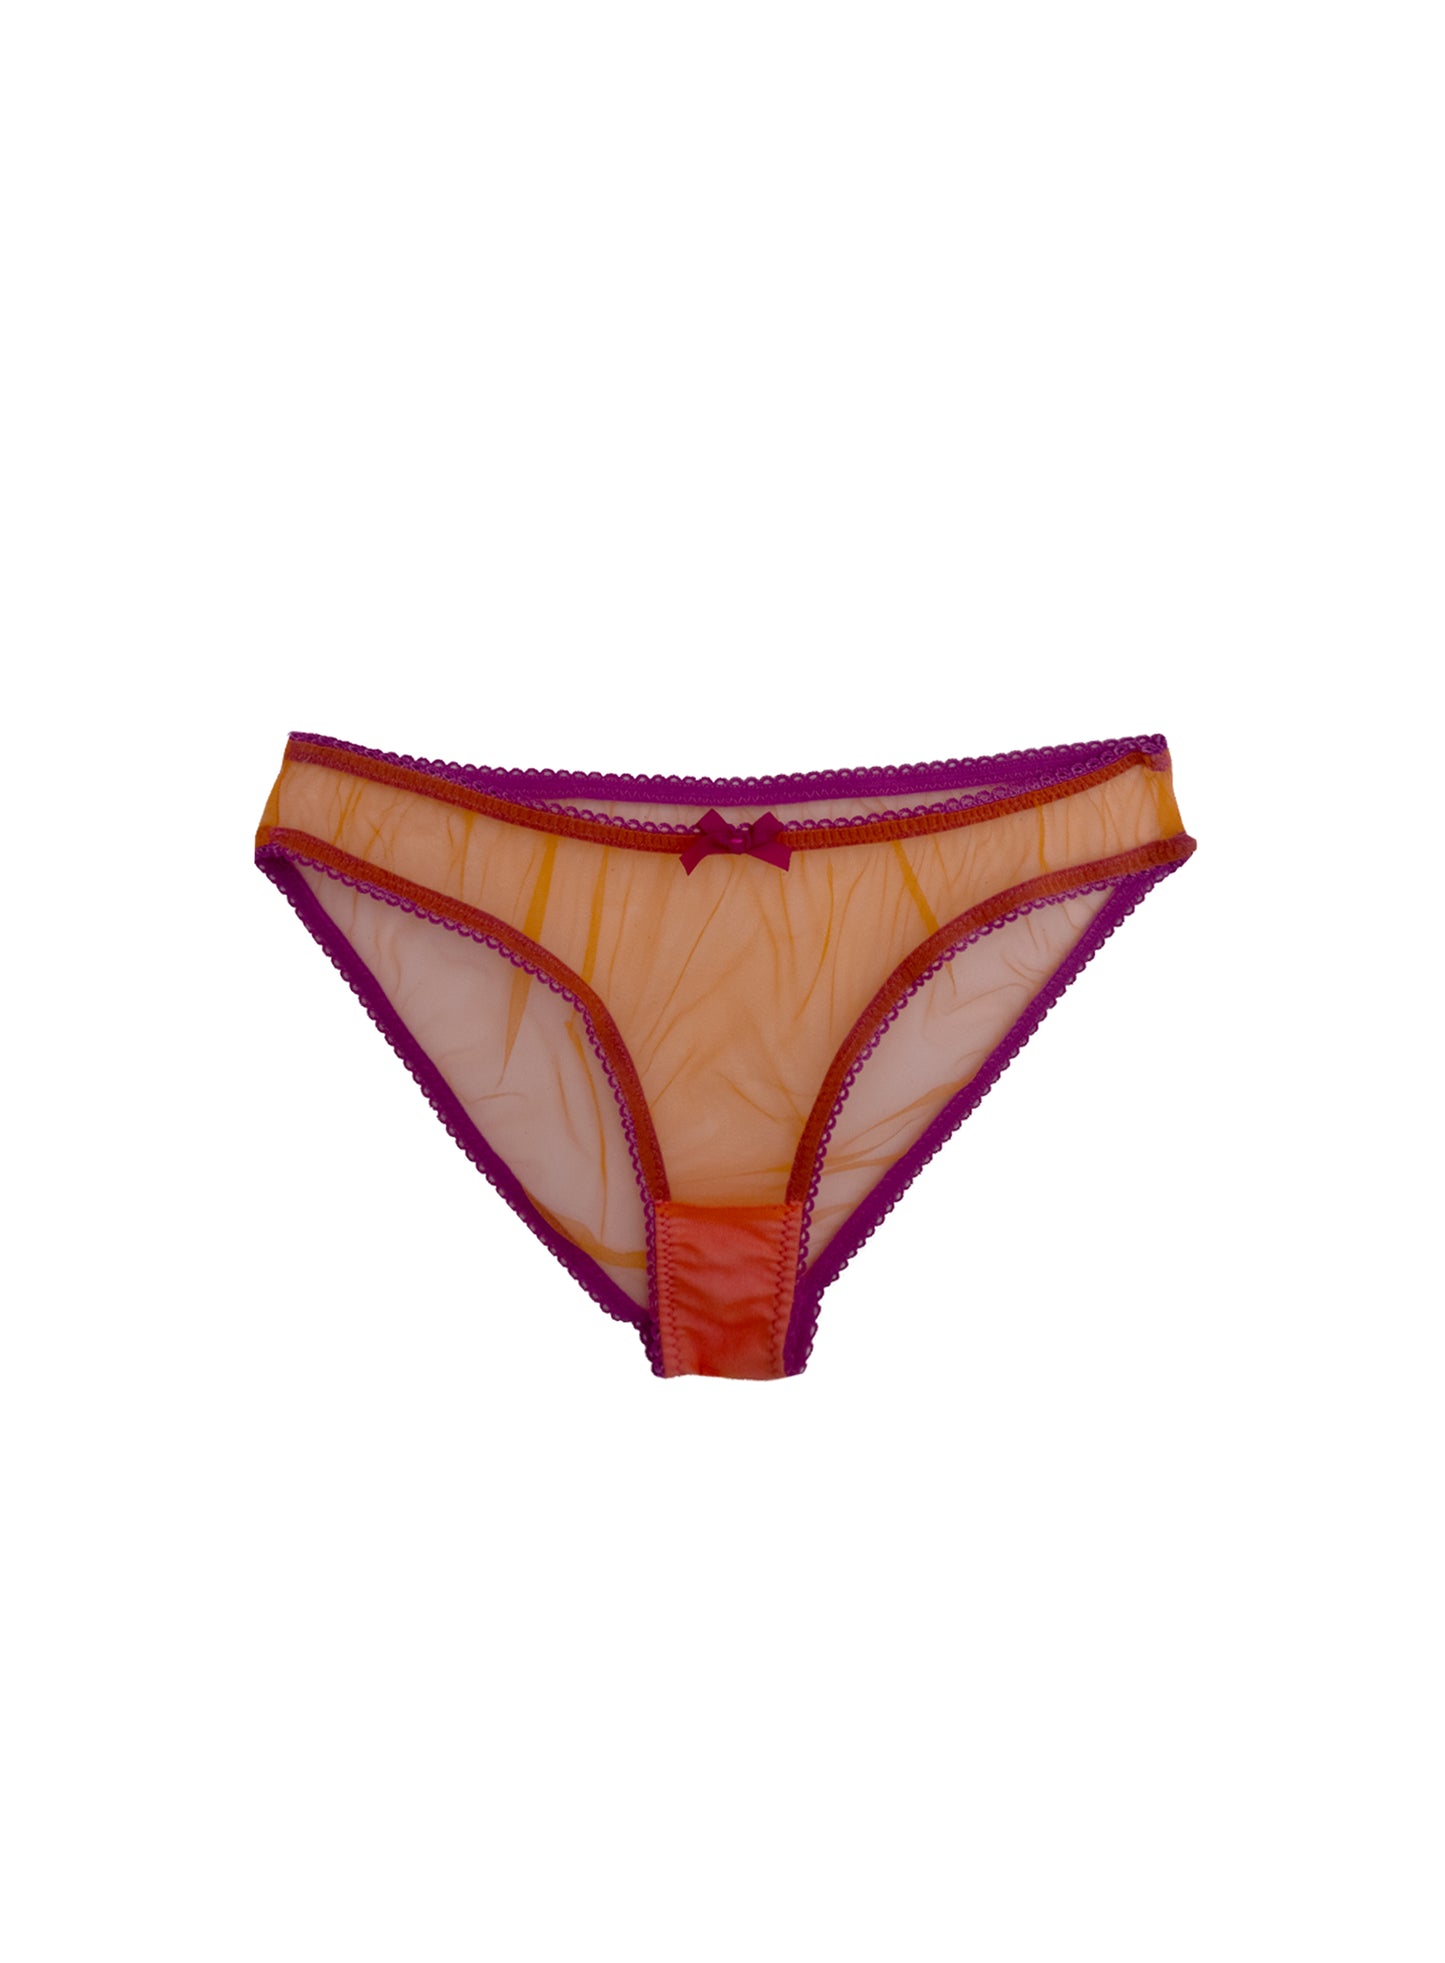 Kim - in apricot tulle knickers